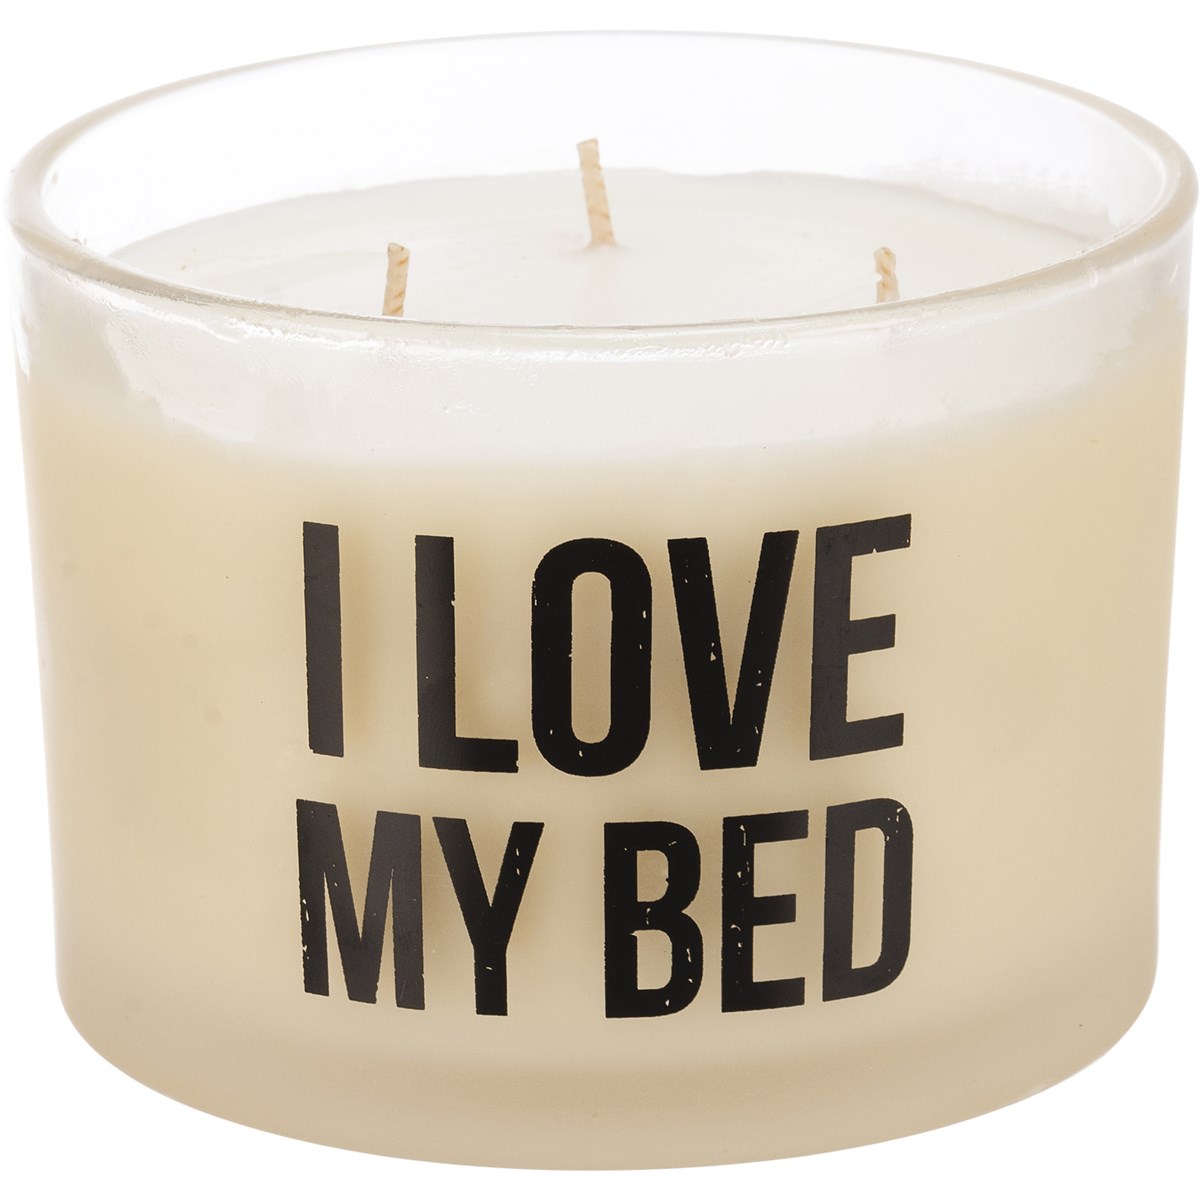 I Love My Bed Jar Candle - Soy Wax, Glass, Cotton